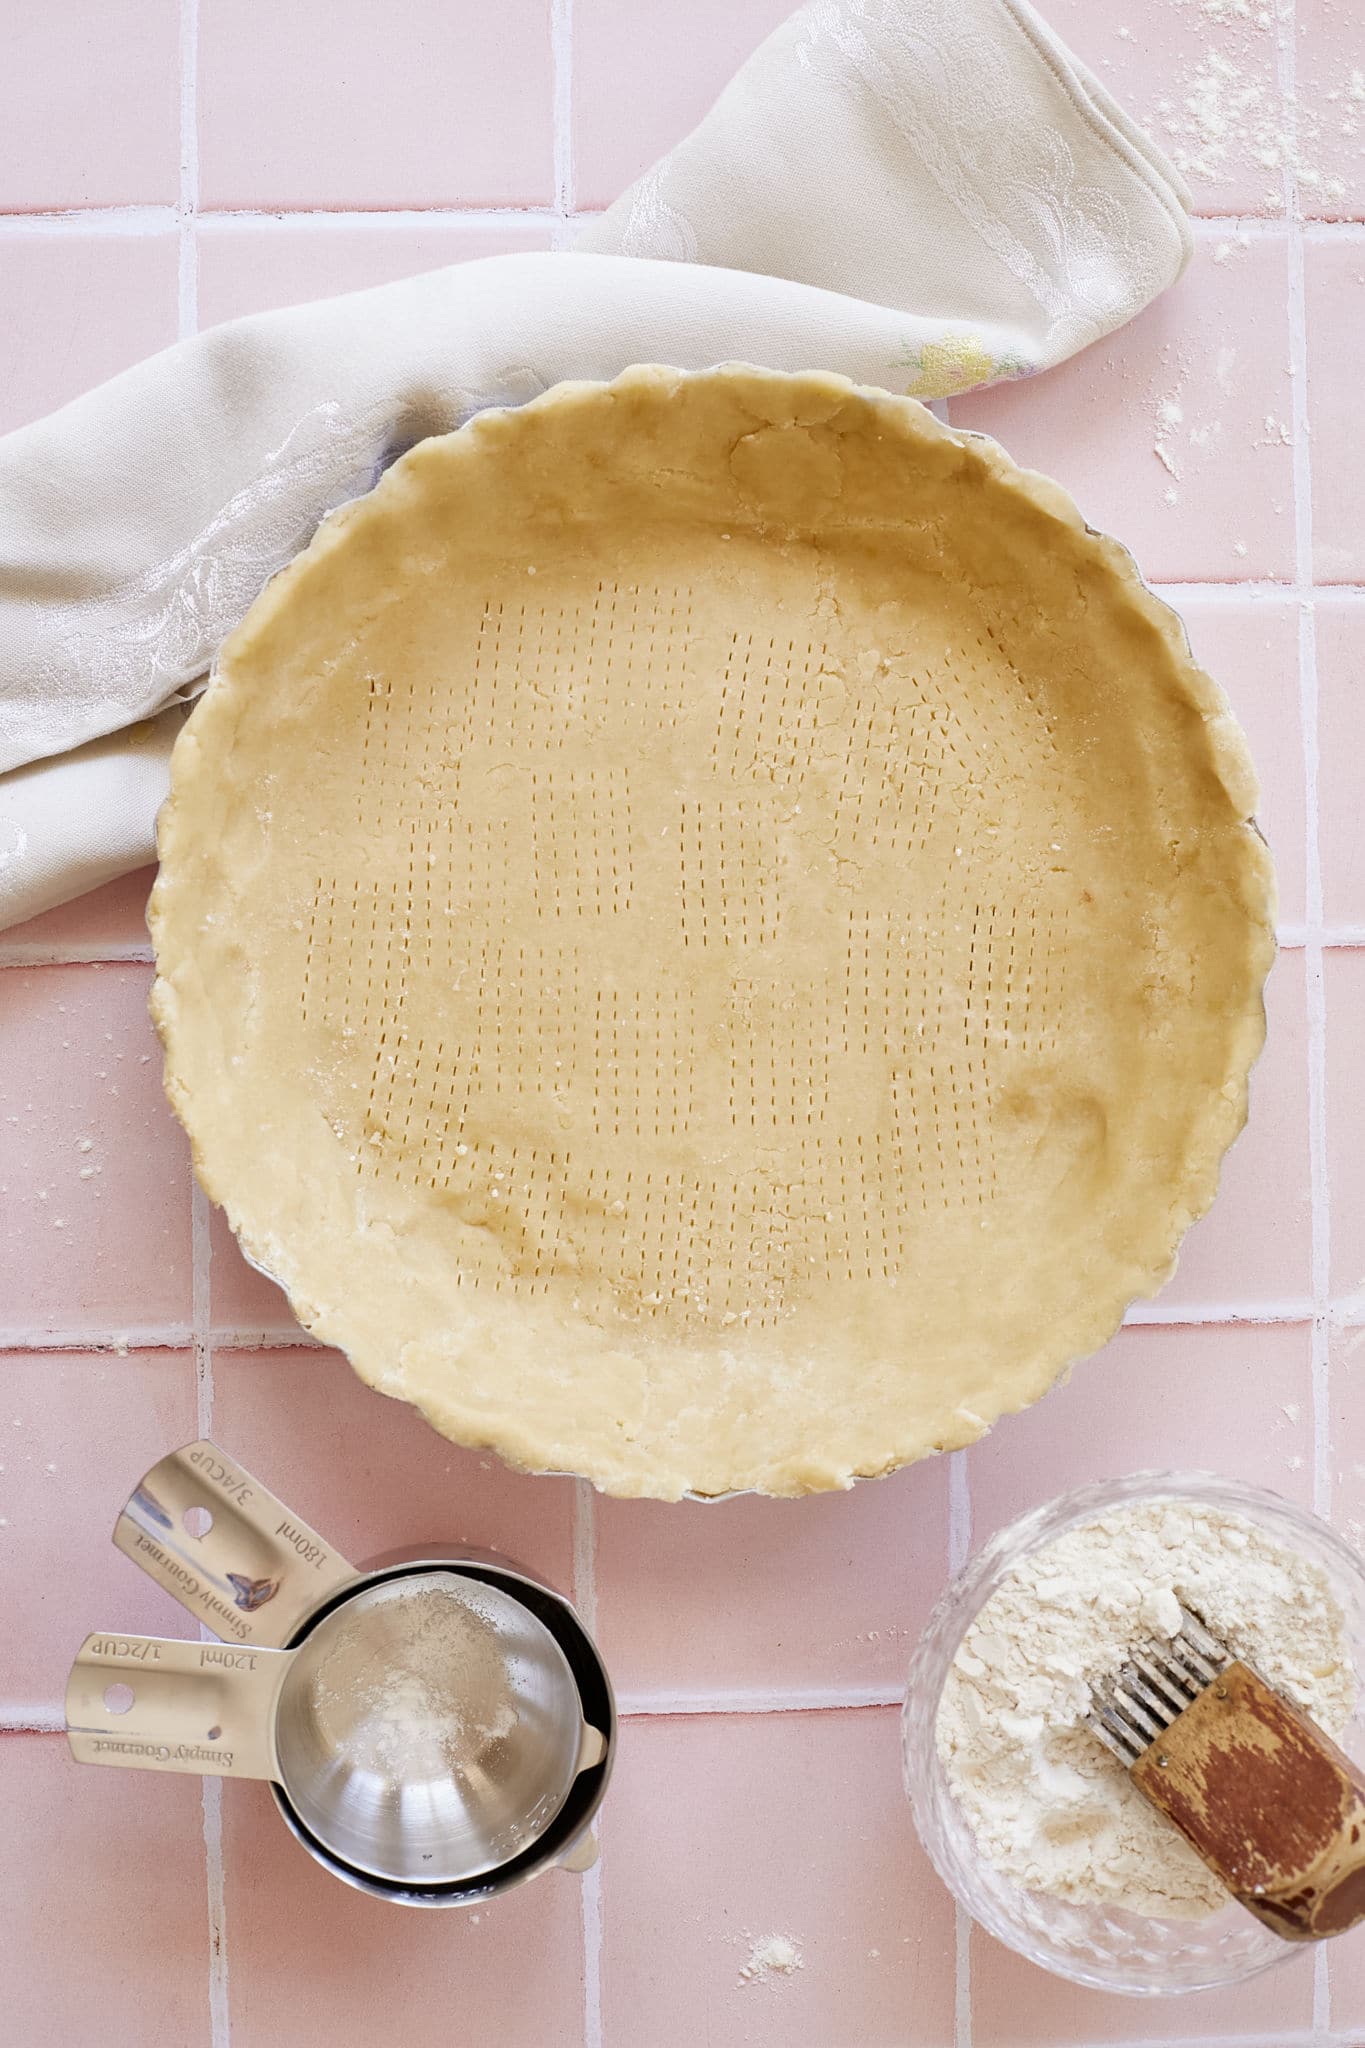 Buttermilk pie crust pressed into a pie tin, with fork marks to let out steam, next to a napkin, glass bowl of flour and butter with a pastry blender, and metal measuring spoons on a pink tile counter.